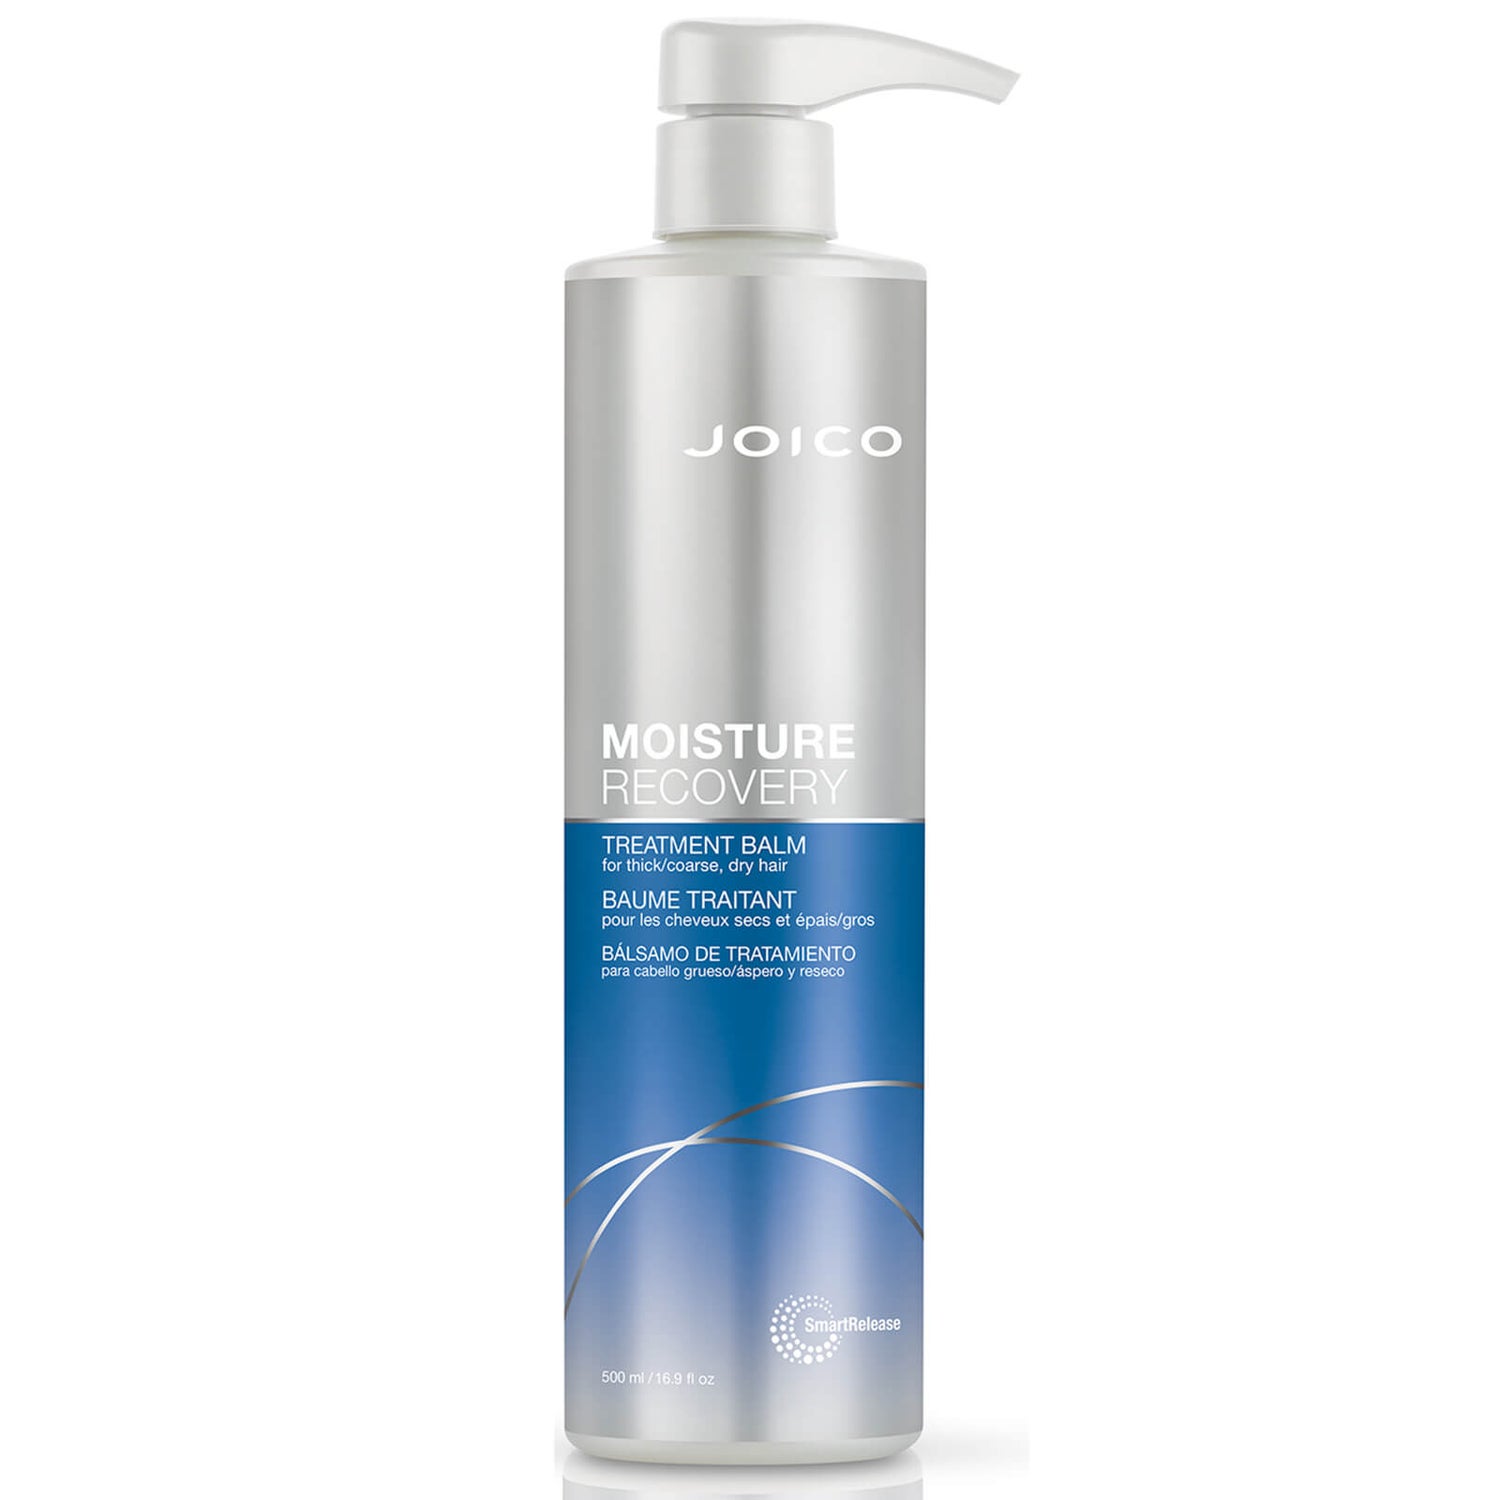 Joico Moisture Recovery Treatment Balm For Thick-Coarse, Dry Hair 500ml